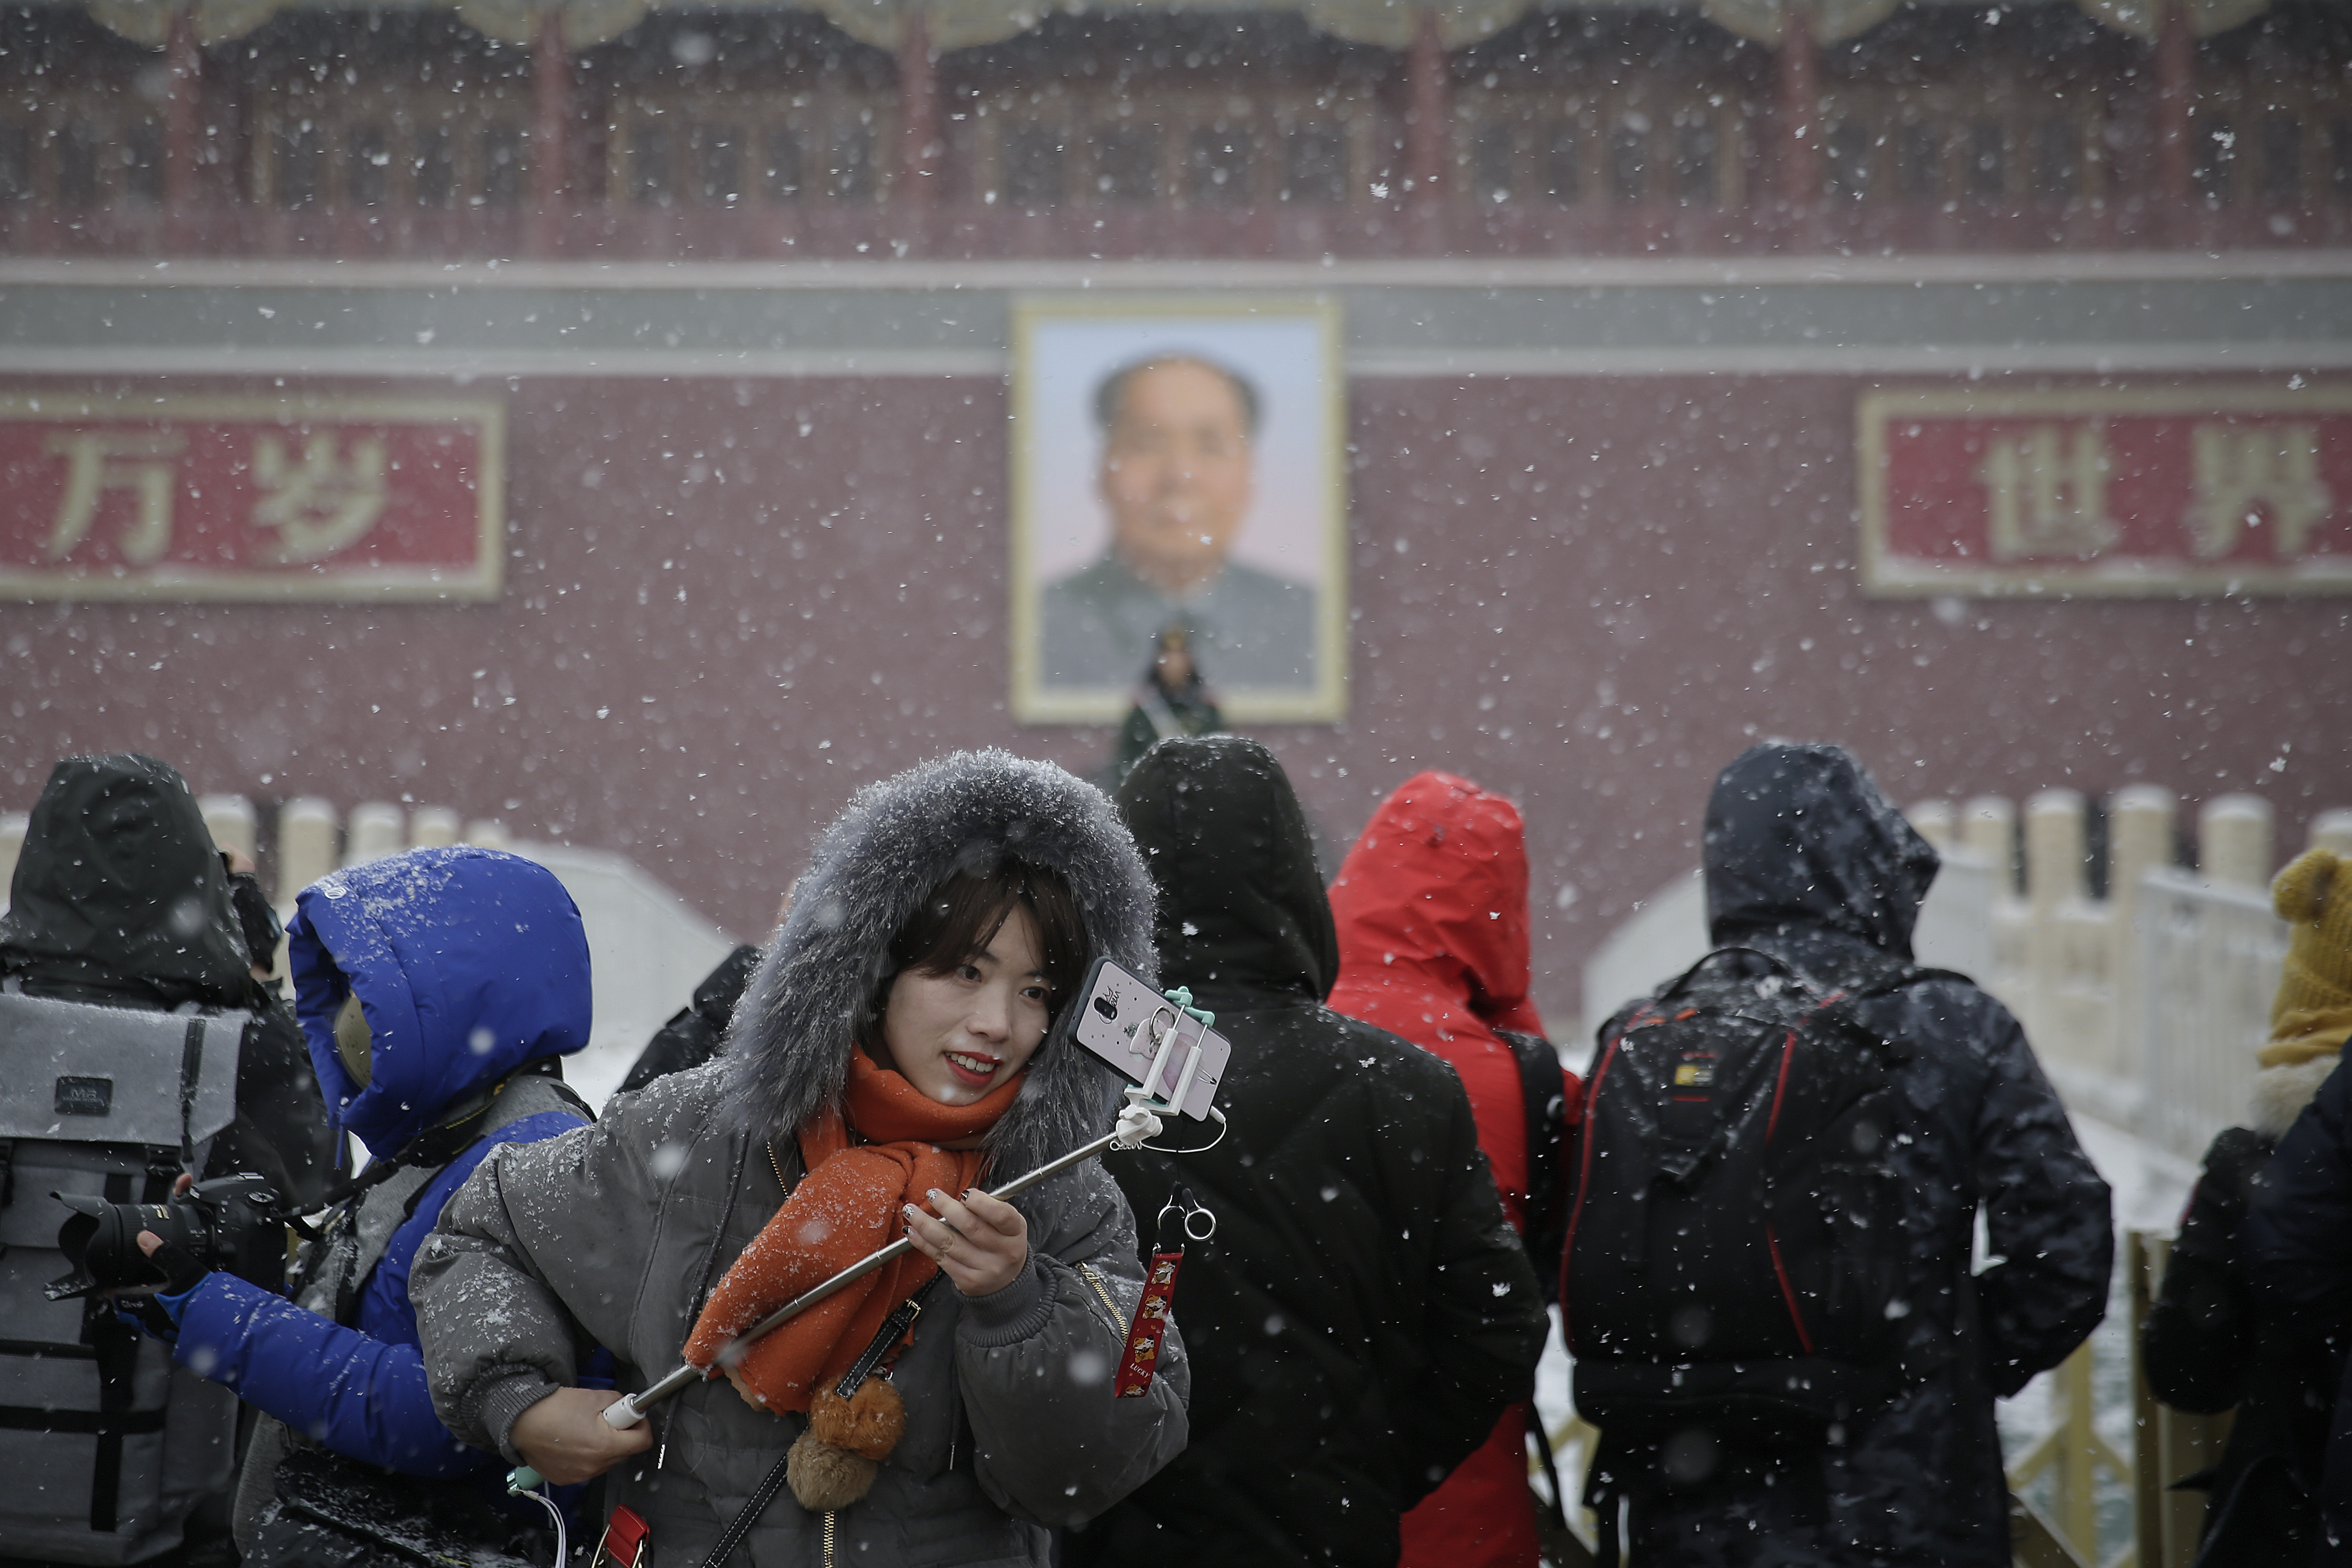 A woman checks her photo as visitors takes photos of Tiananmen Gate as snow falls in Beijing, Tuesday, Feb. 12, 2019. China's capital is mostly dry in the winter but a storm system brought snow to the city on Tuesday morning. (AP Photo/Andy Wong)